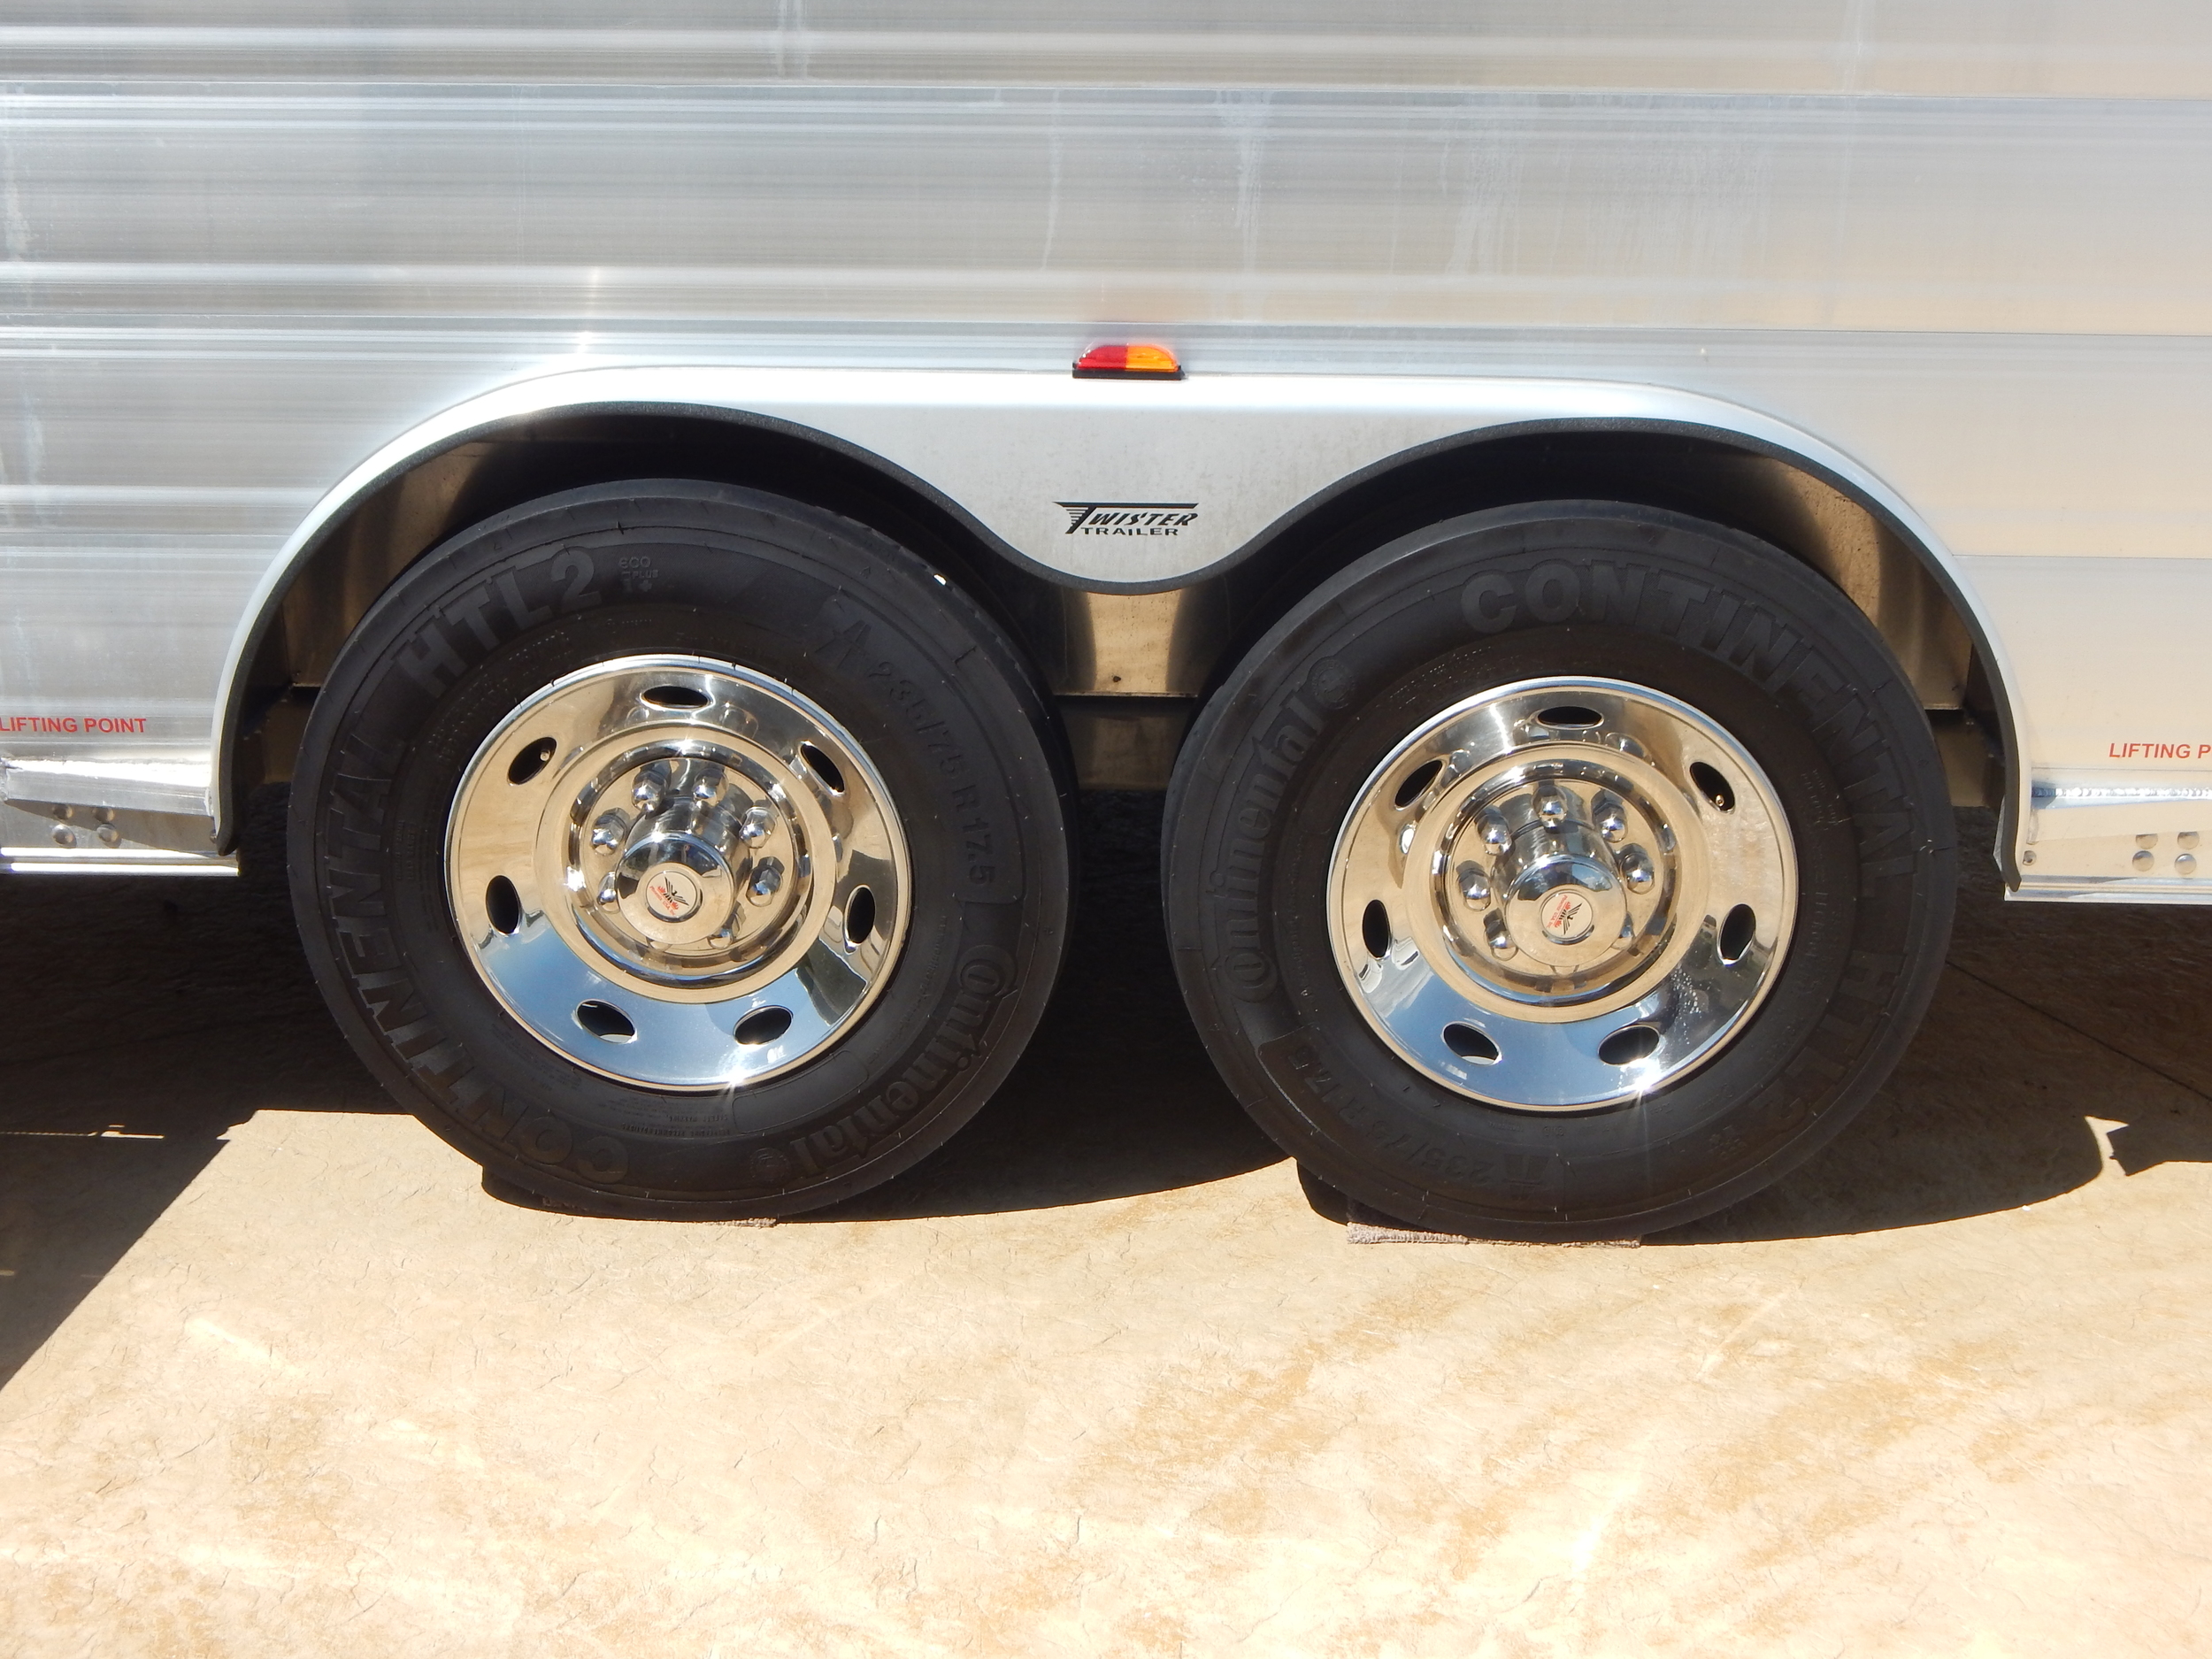 17.5" Steel Rims w/ SSTL Simulators<a href=“/area-of-your-site”>→</a><strong></strong>